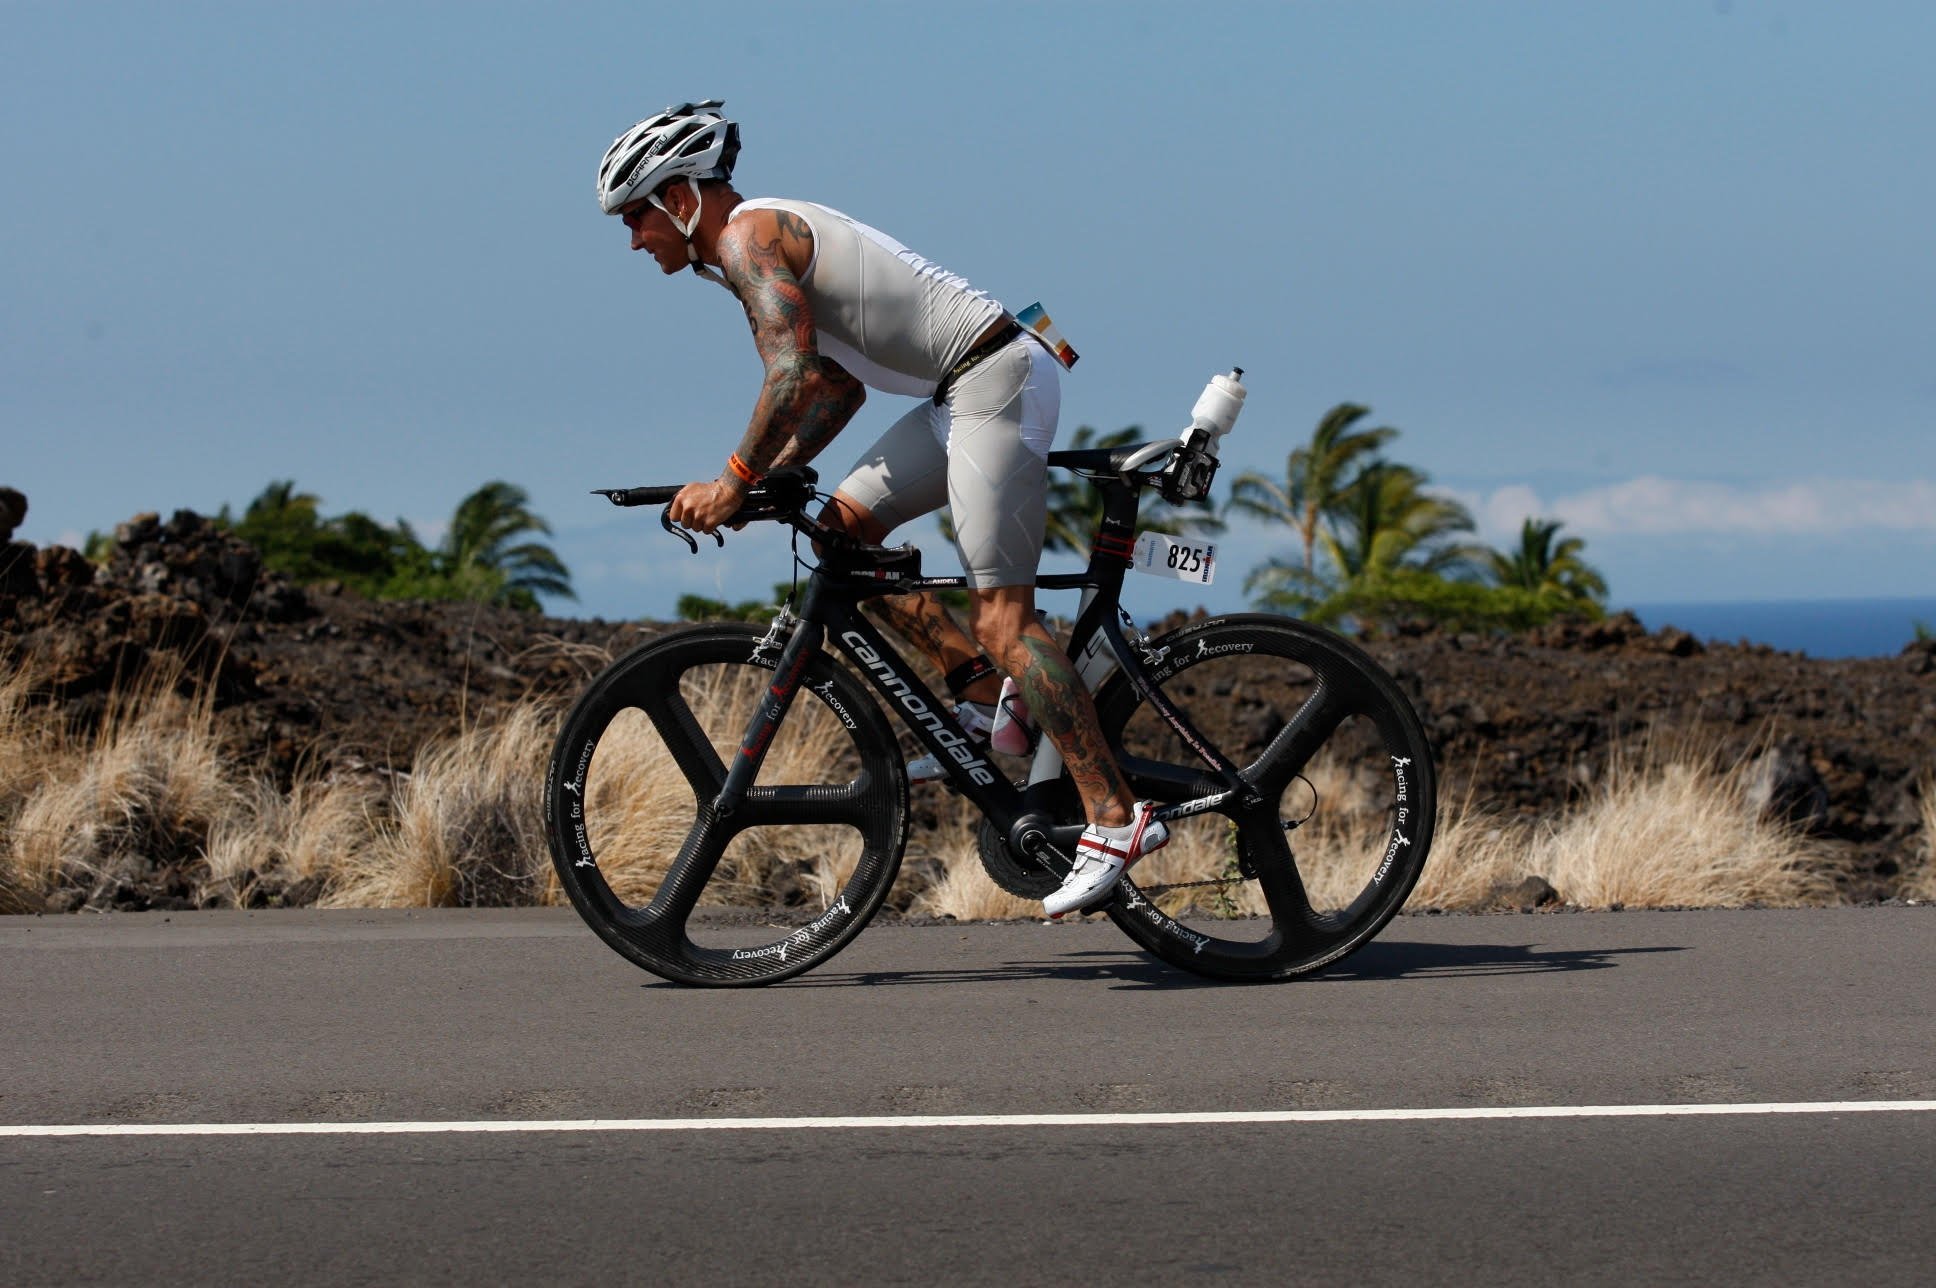 Todd Crandell was an addict for 13 years and he's finished 28 Ironmans in sobriety at the age of 50. He helps other addicts through Racing for Recovery.